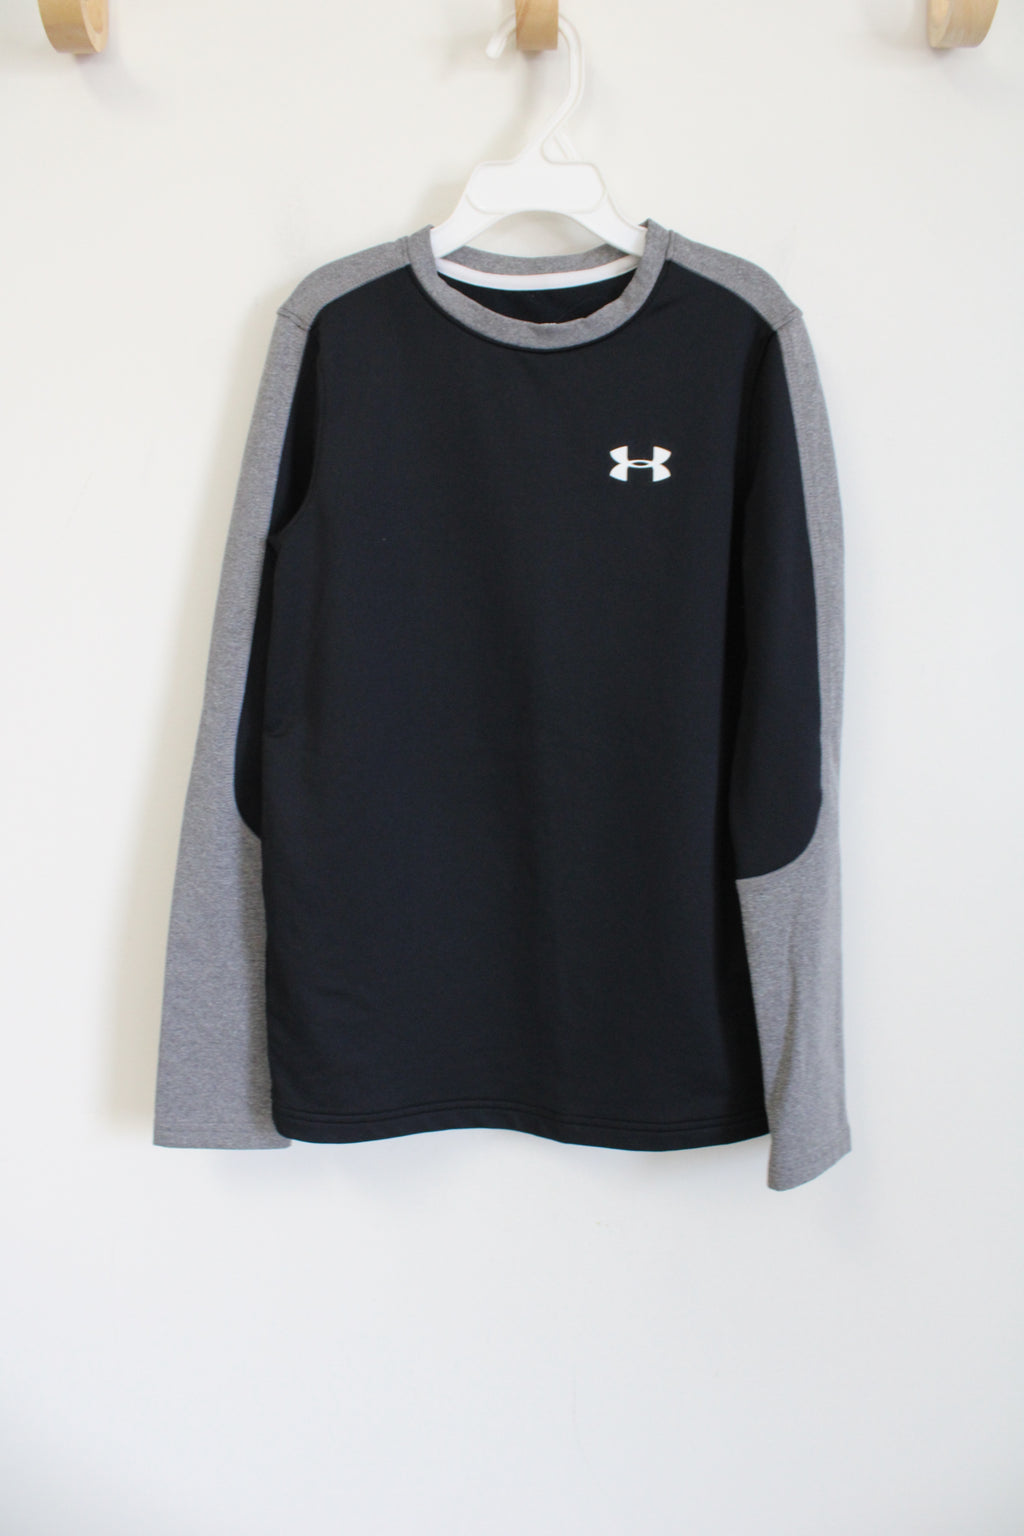 Under Armour Fitted ColdGear Thermal Black Gray Long Sleeved Shirt | Youth M (10/12)